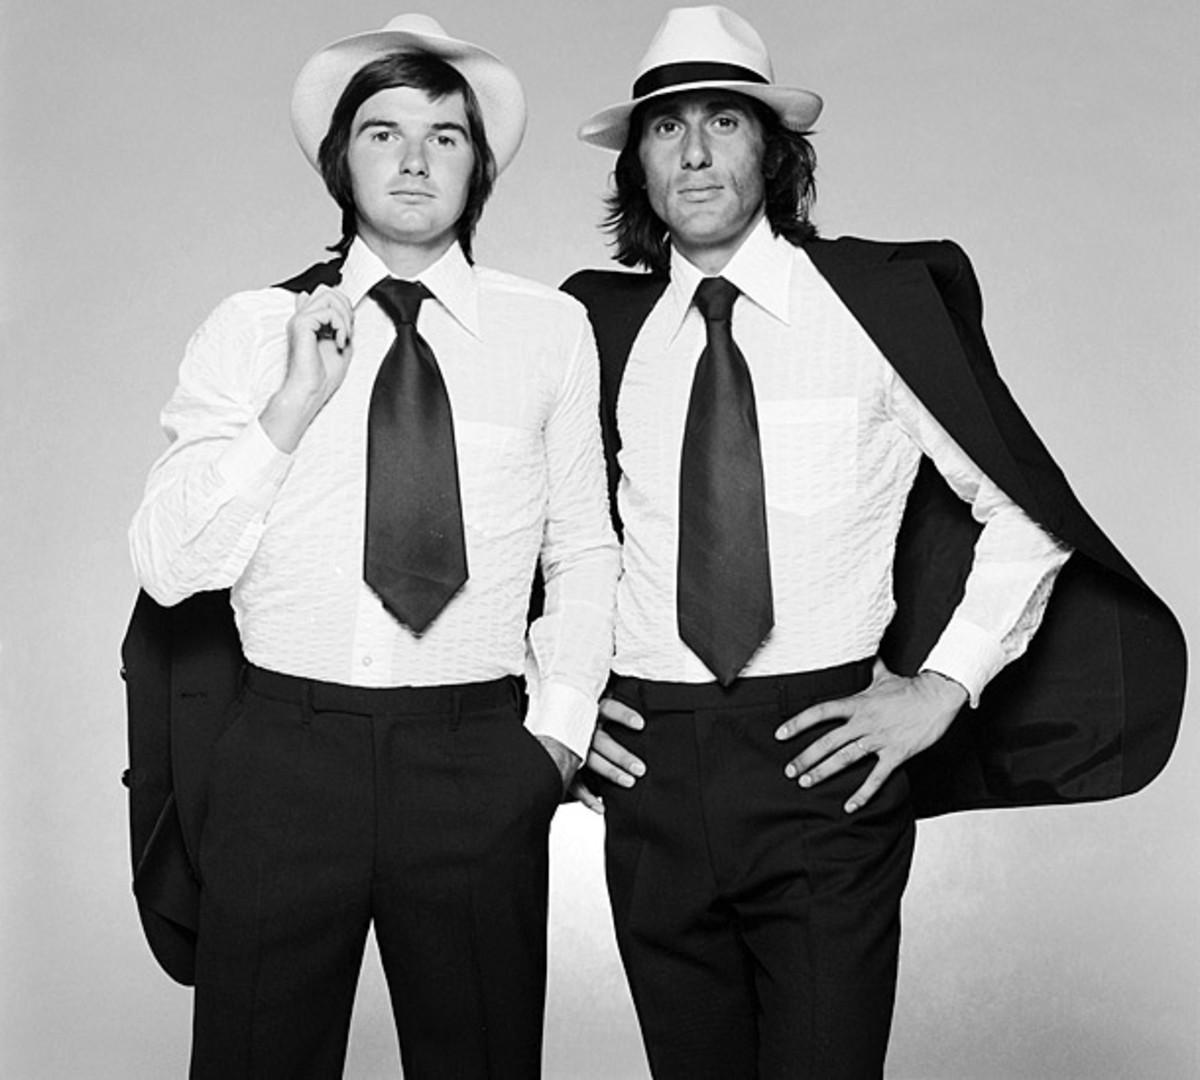 Jimmy Connors and Ilie Nastase 